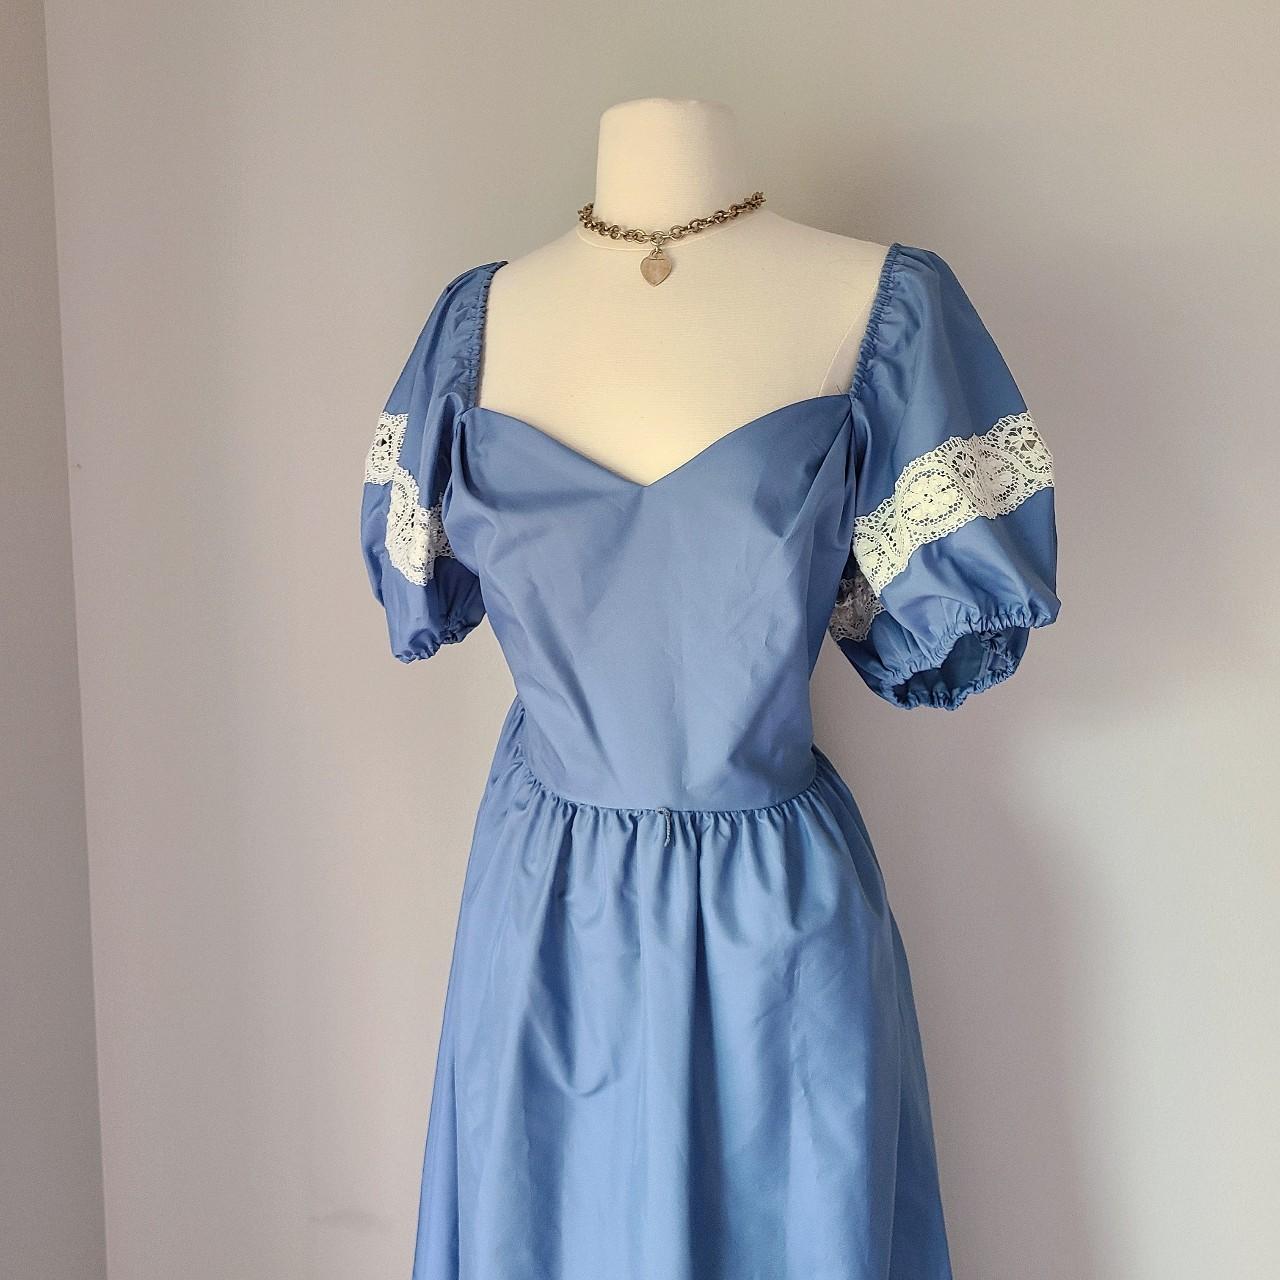 Product Image 2 - Vintage 1970s Gunne Sax Style